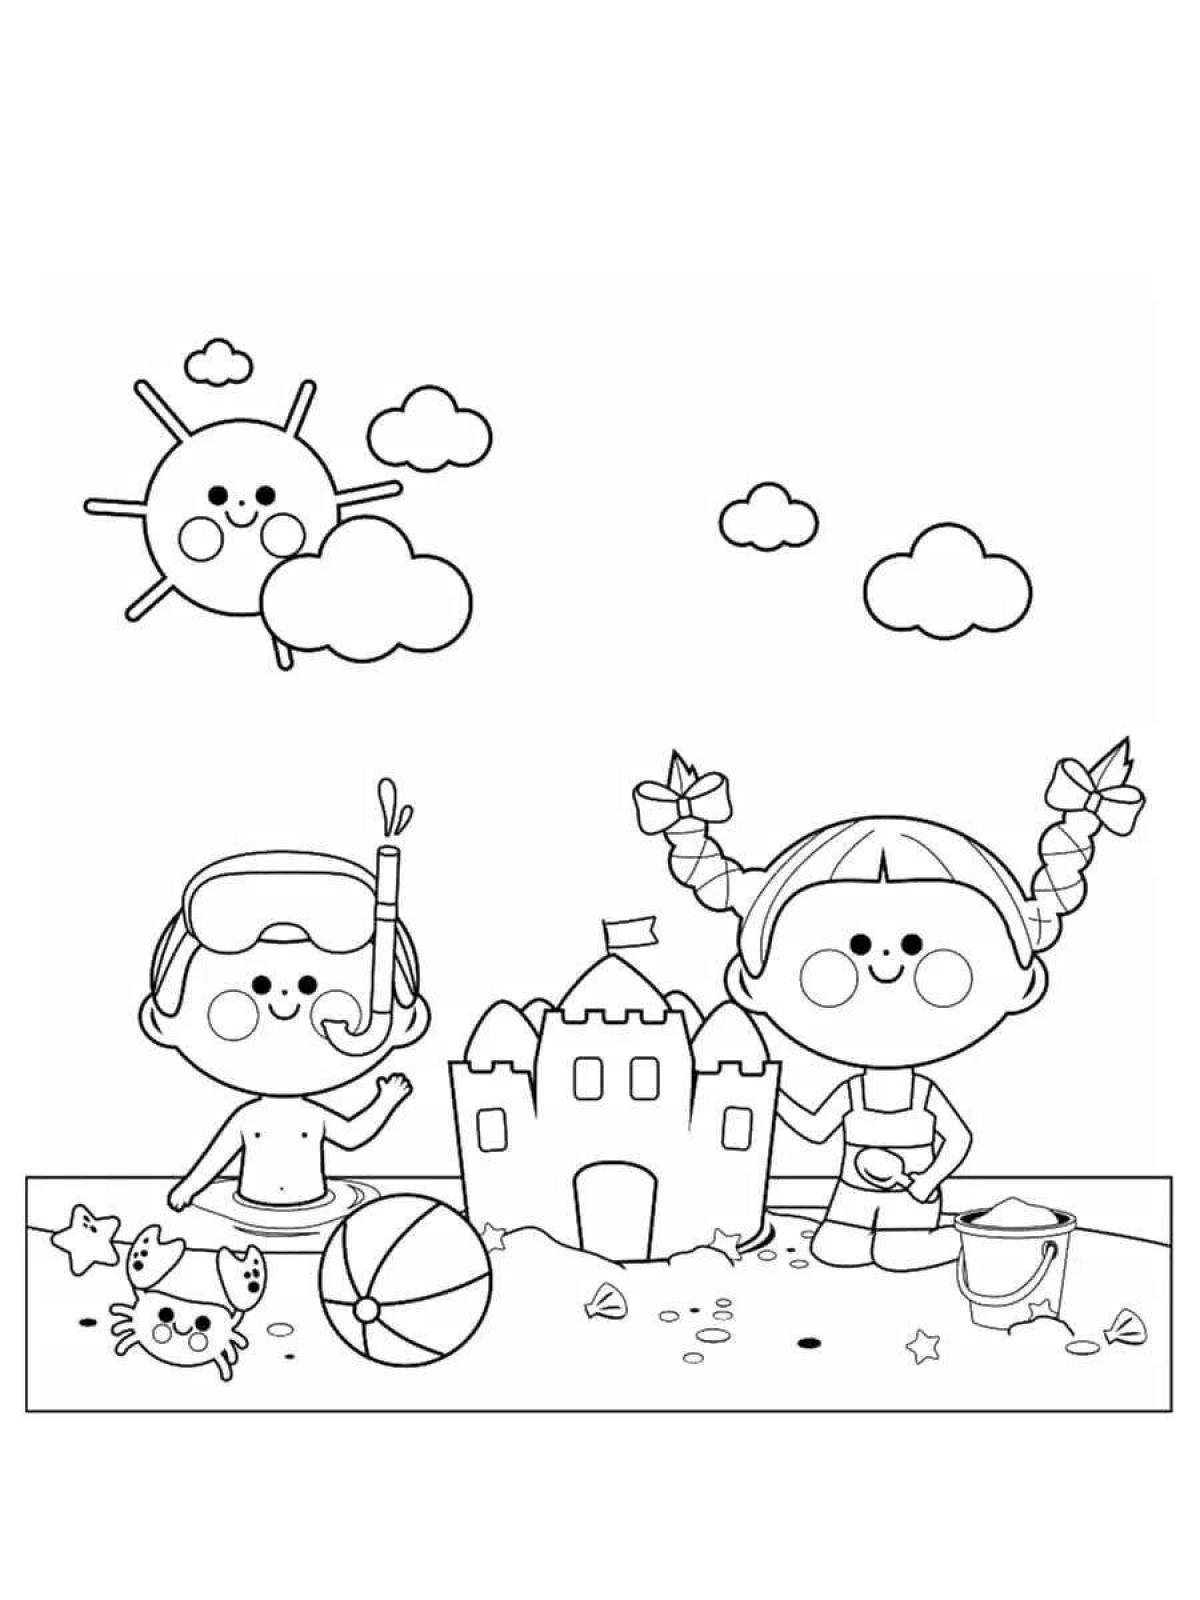 Bright sand game coloring page